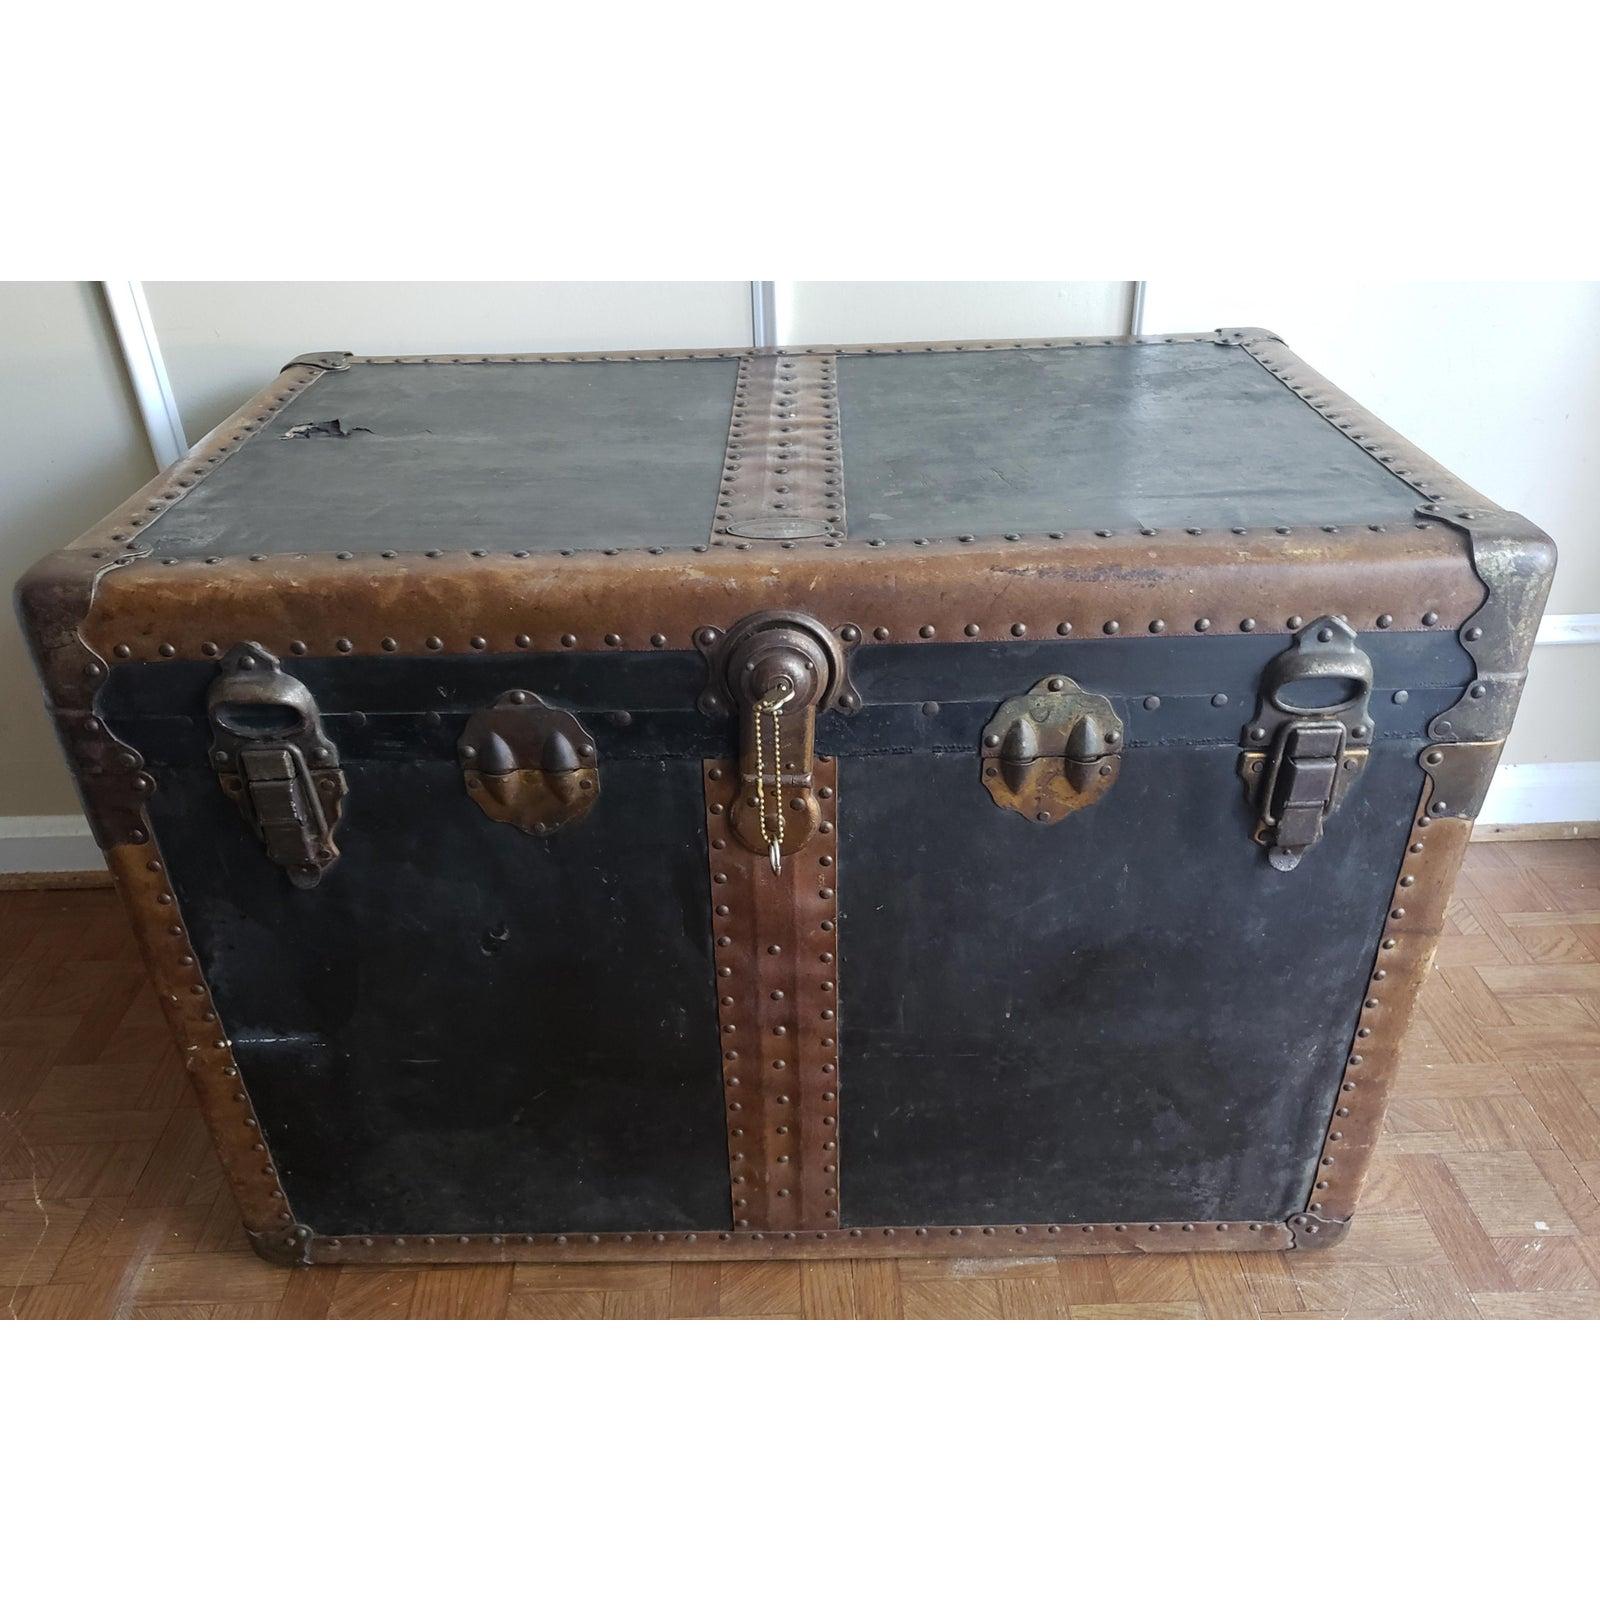 For your consideration is a 1930s Breakless Co. Steamers trunk with functional original lock and key. Made out of leather, fiber, pine wood, steel. Good vintage condition with leather side Handles not functional and top cover loss spot as pictured.